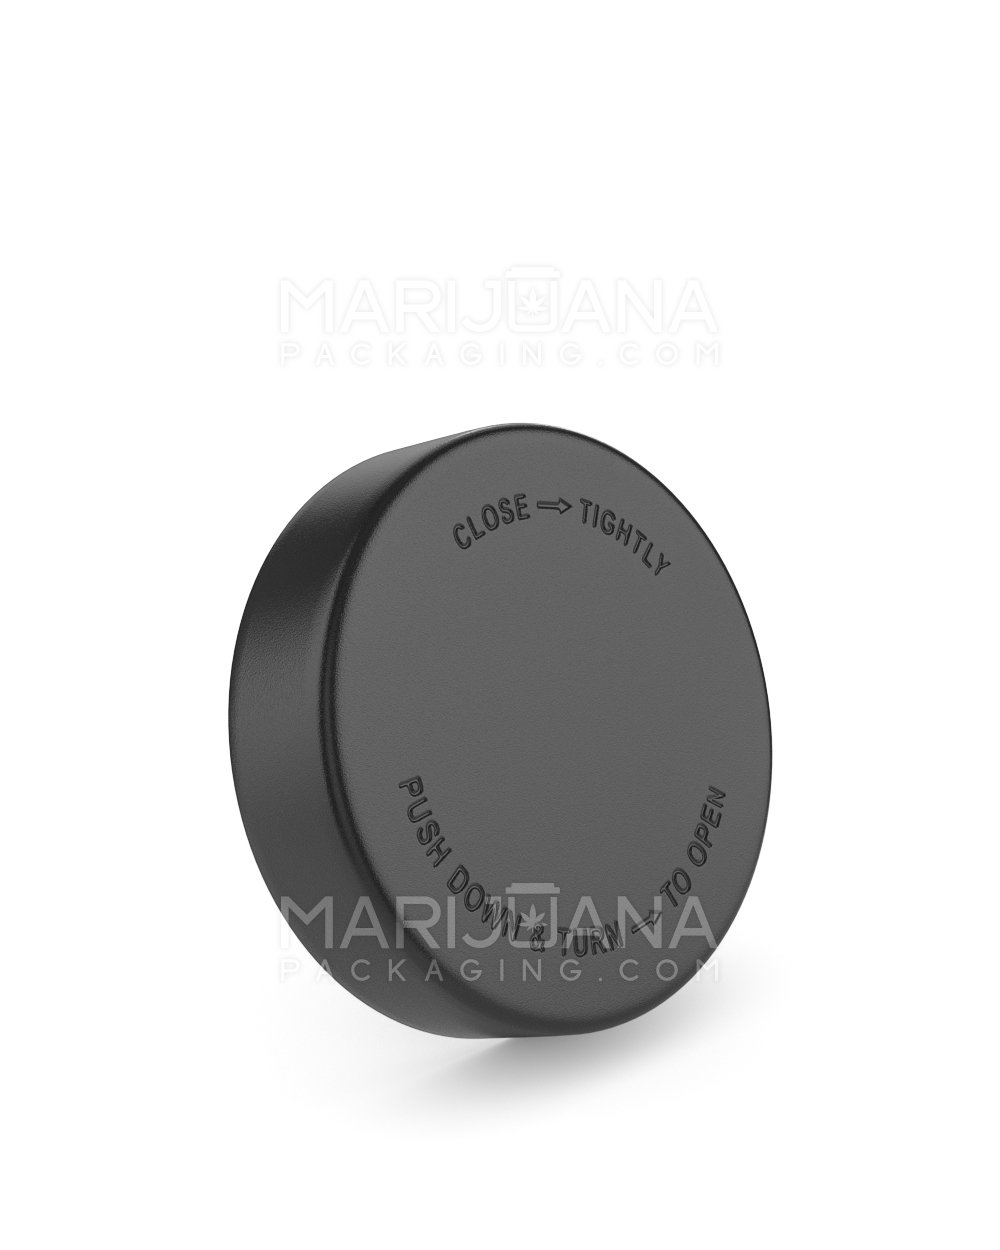 Child Resistant | Smooth Push Down & Turn Plastic Caps w/ Foam Liner | 57mm - Semi Gloss Black - 72 Count - 1